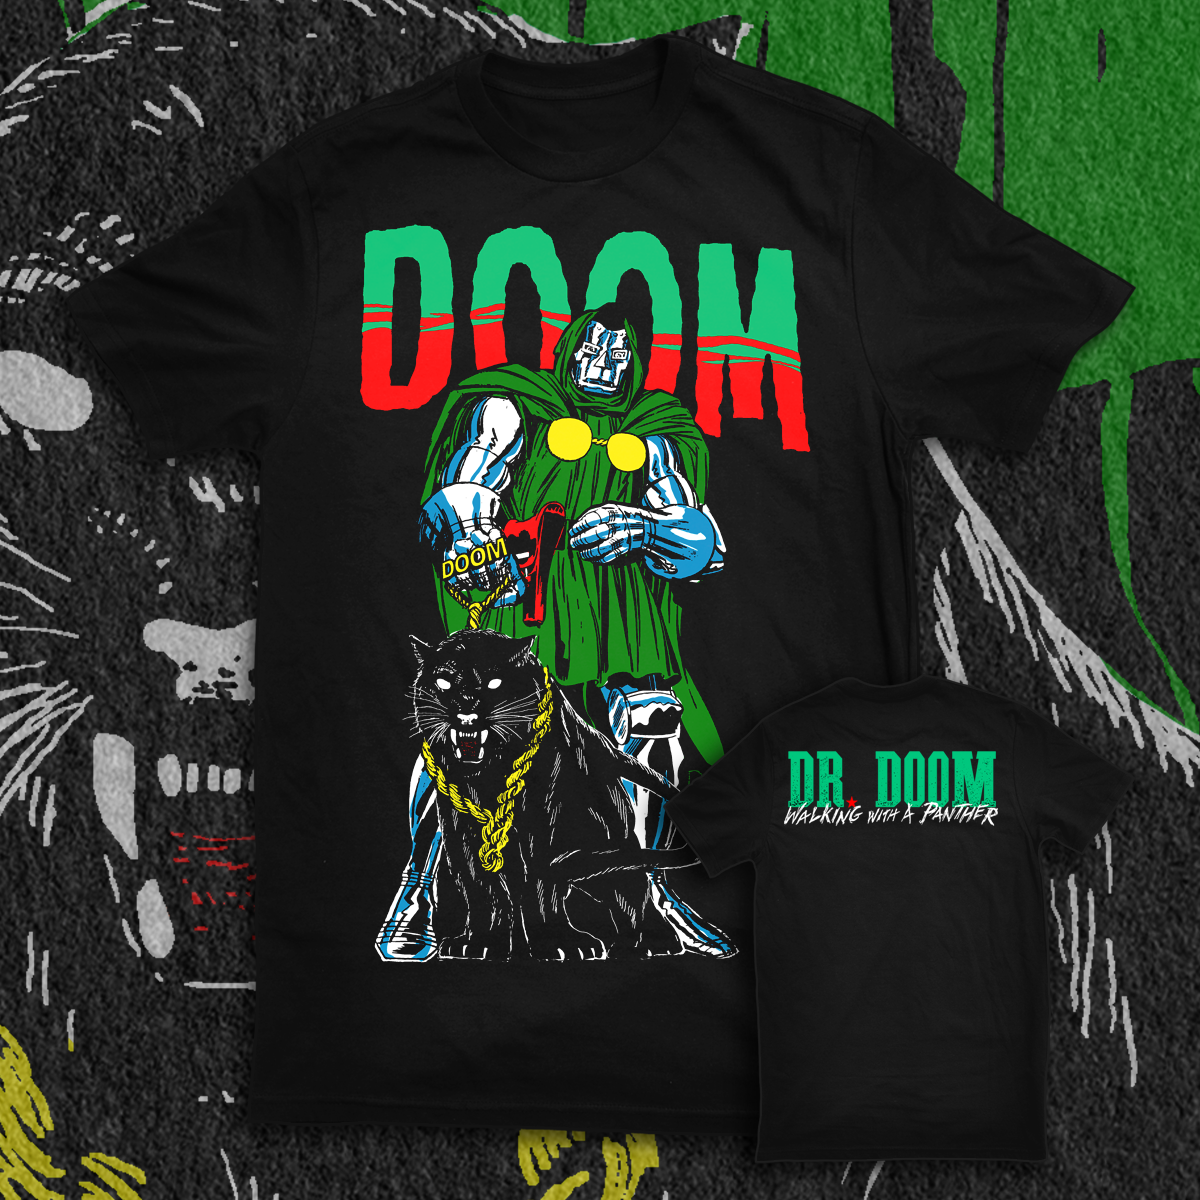 DOOM "WALKING WITH A PANTHER" SHIRT